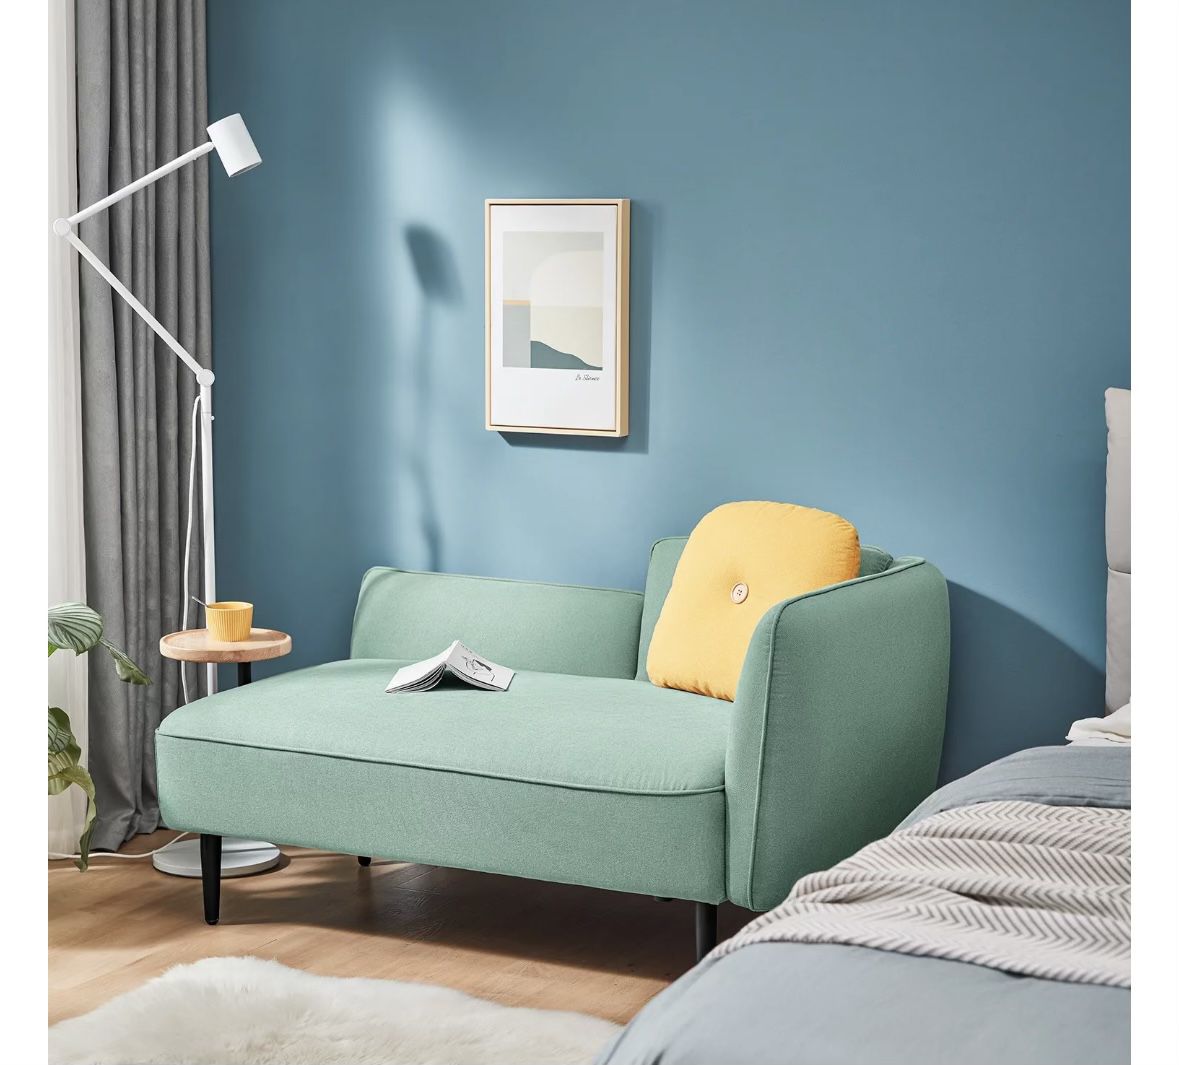 LINSY HOME Small Couches and Sofas with Removable Side Table, Modern Century Sofa Couch for Living Room and Bedroom, Teal 